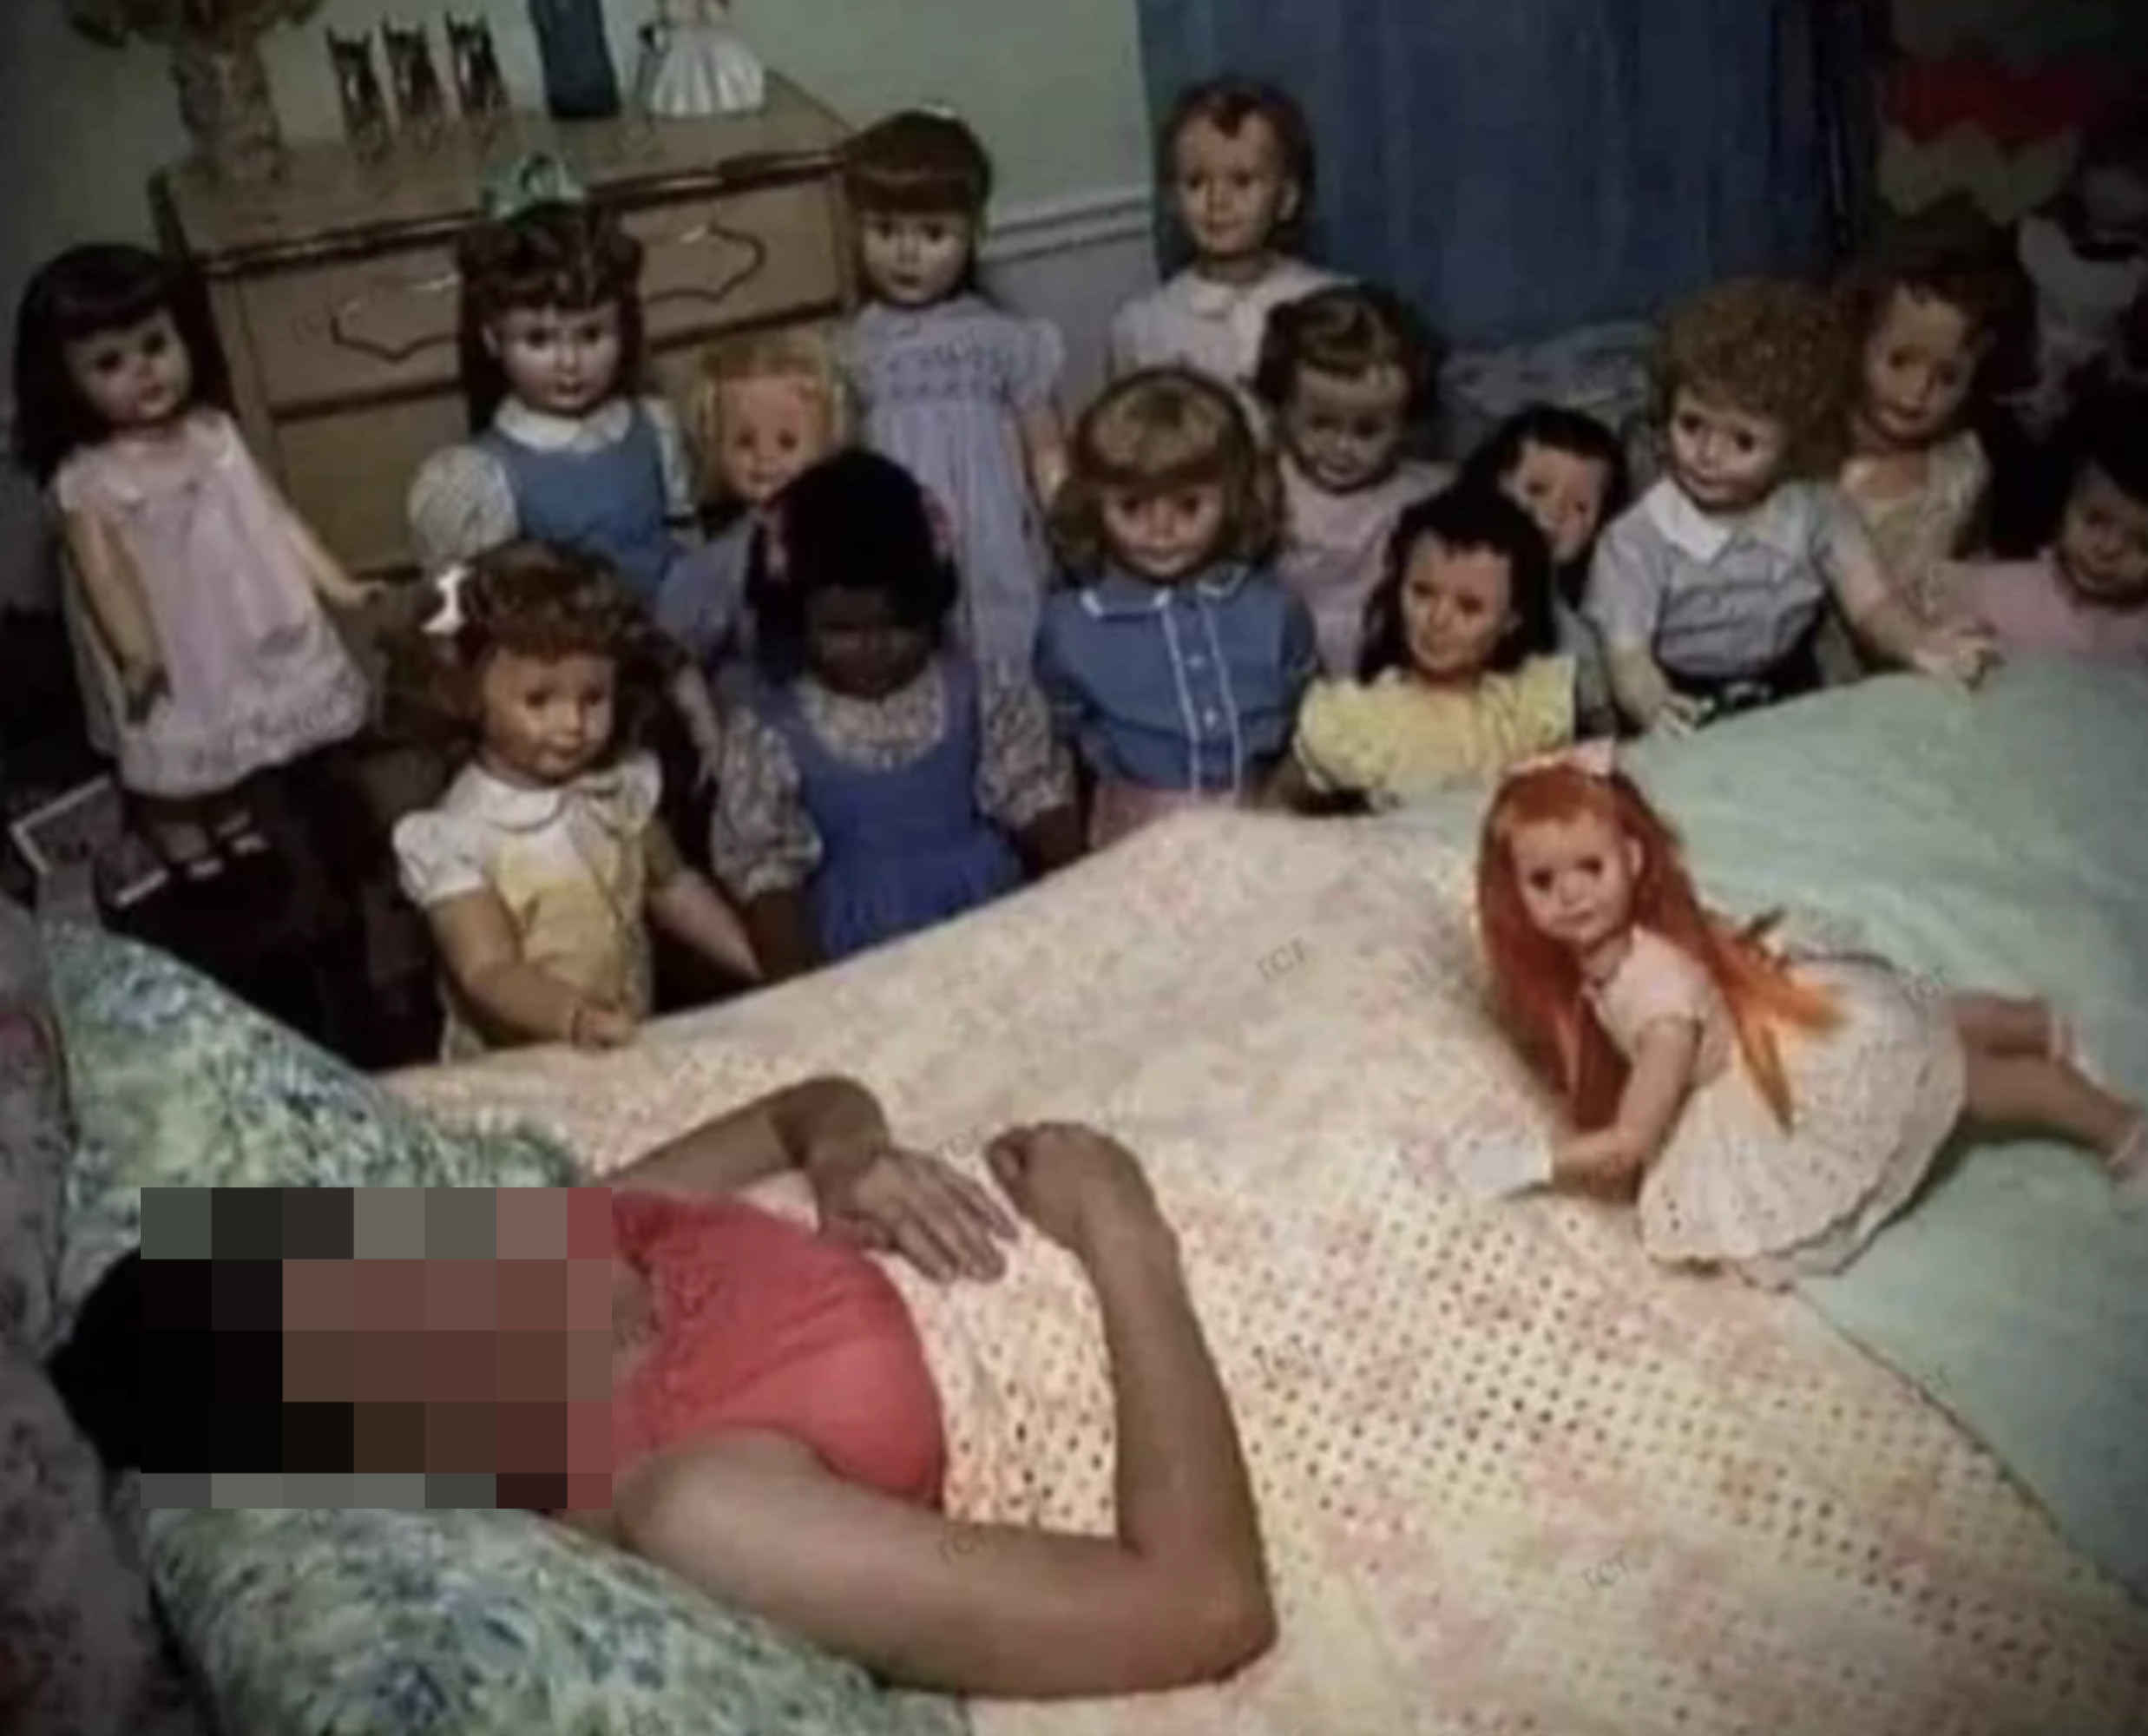 Someone sleeping in a room filled with dolls